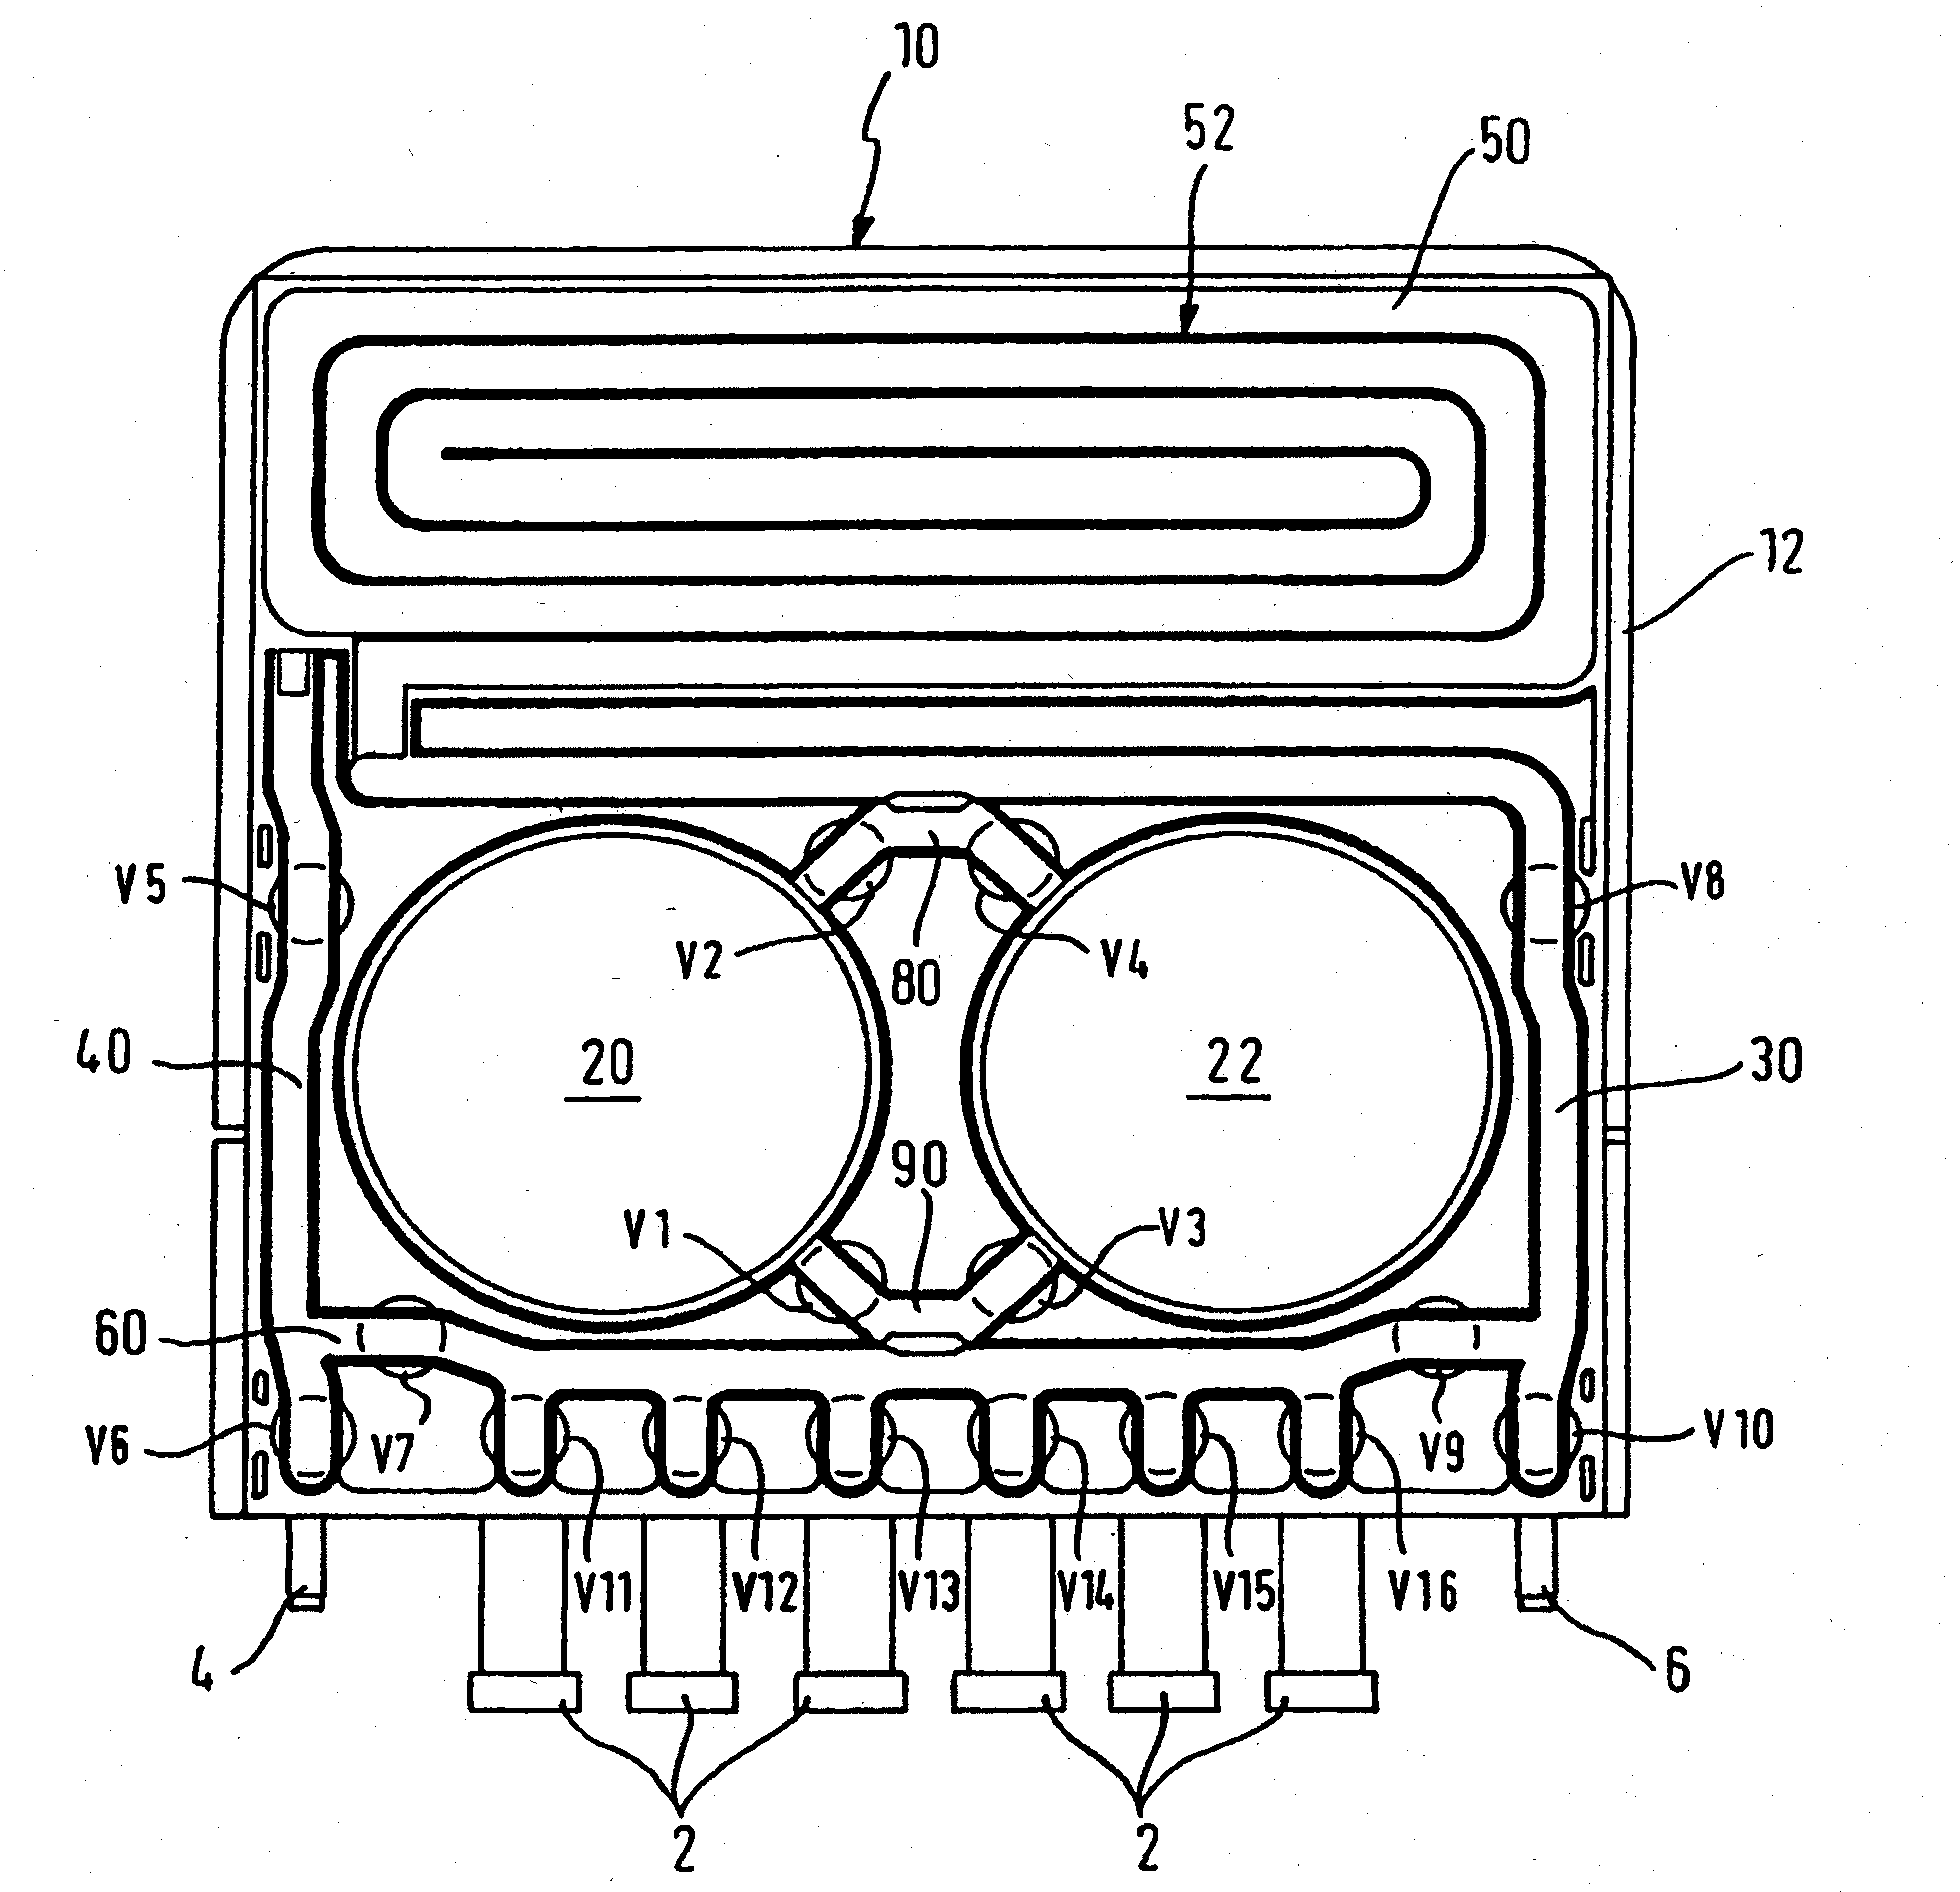 Cartridge for conveying fluids, particularly dialysis fluids